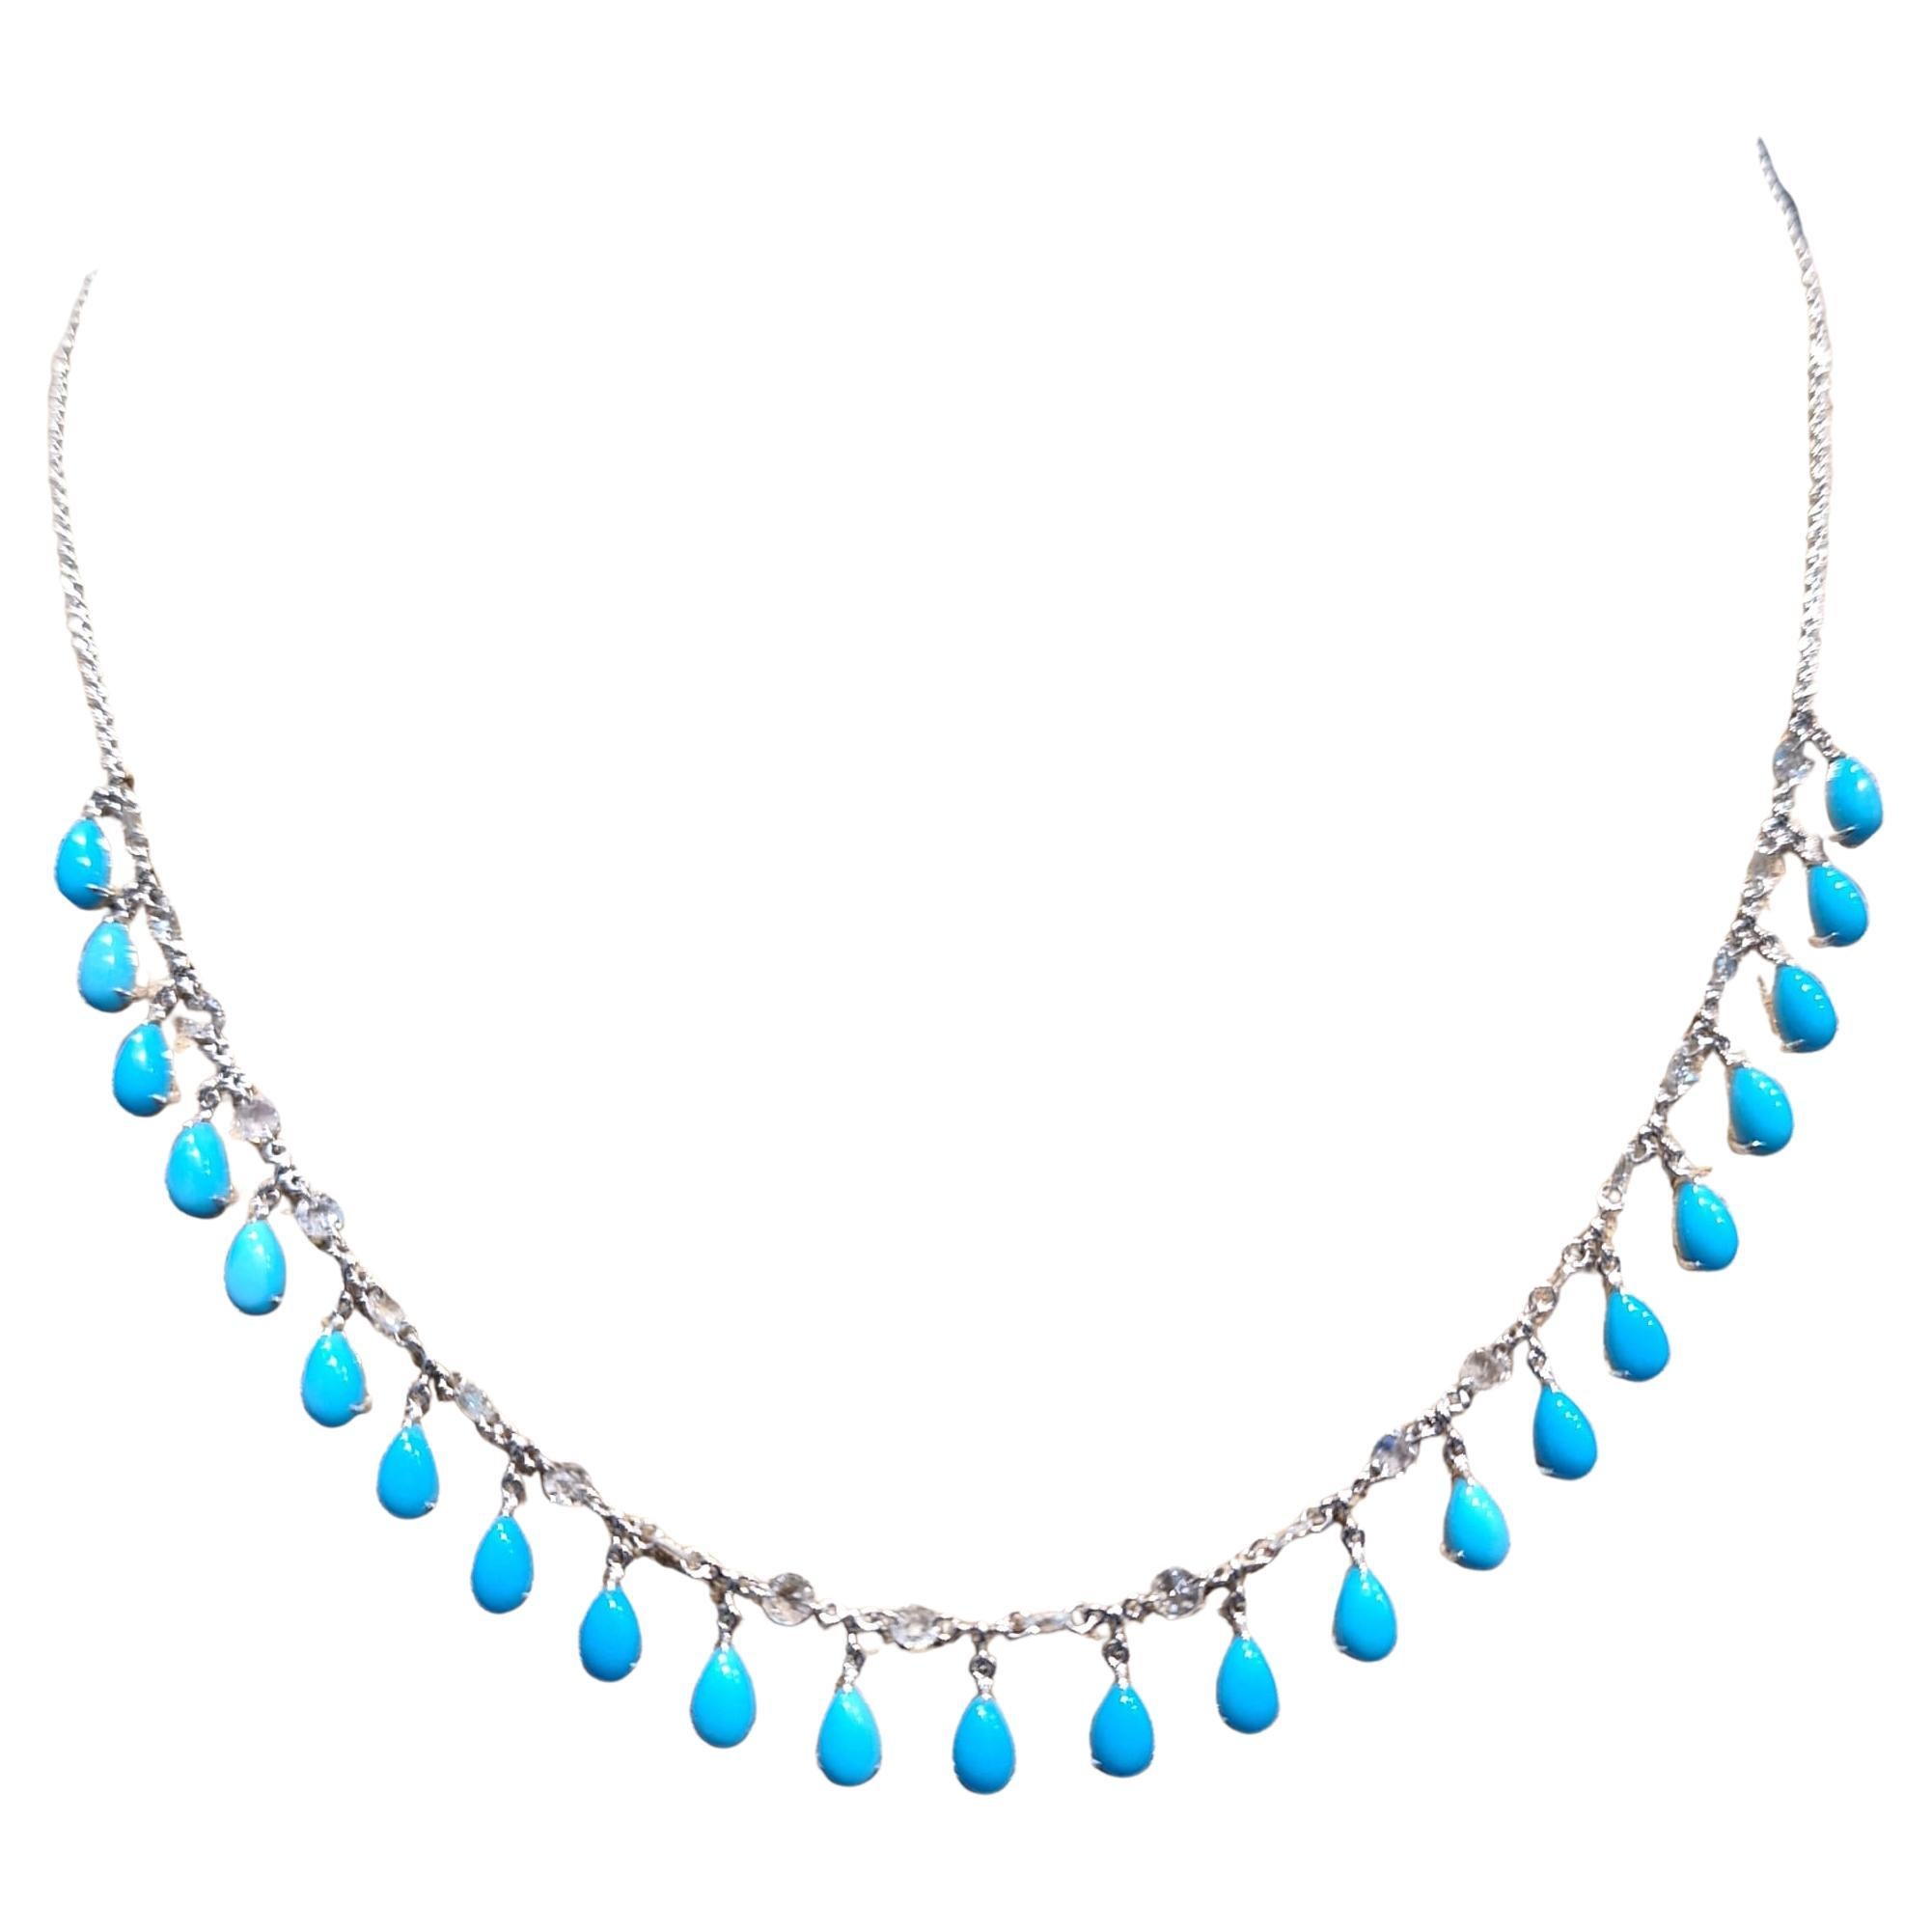 18K White Gold Diamond Necklace with Turquoise